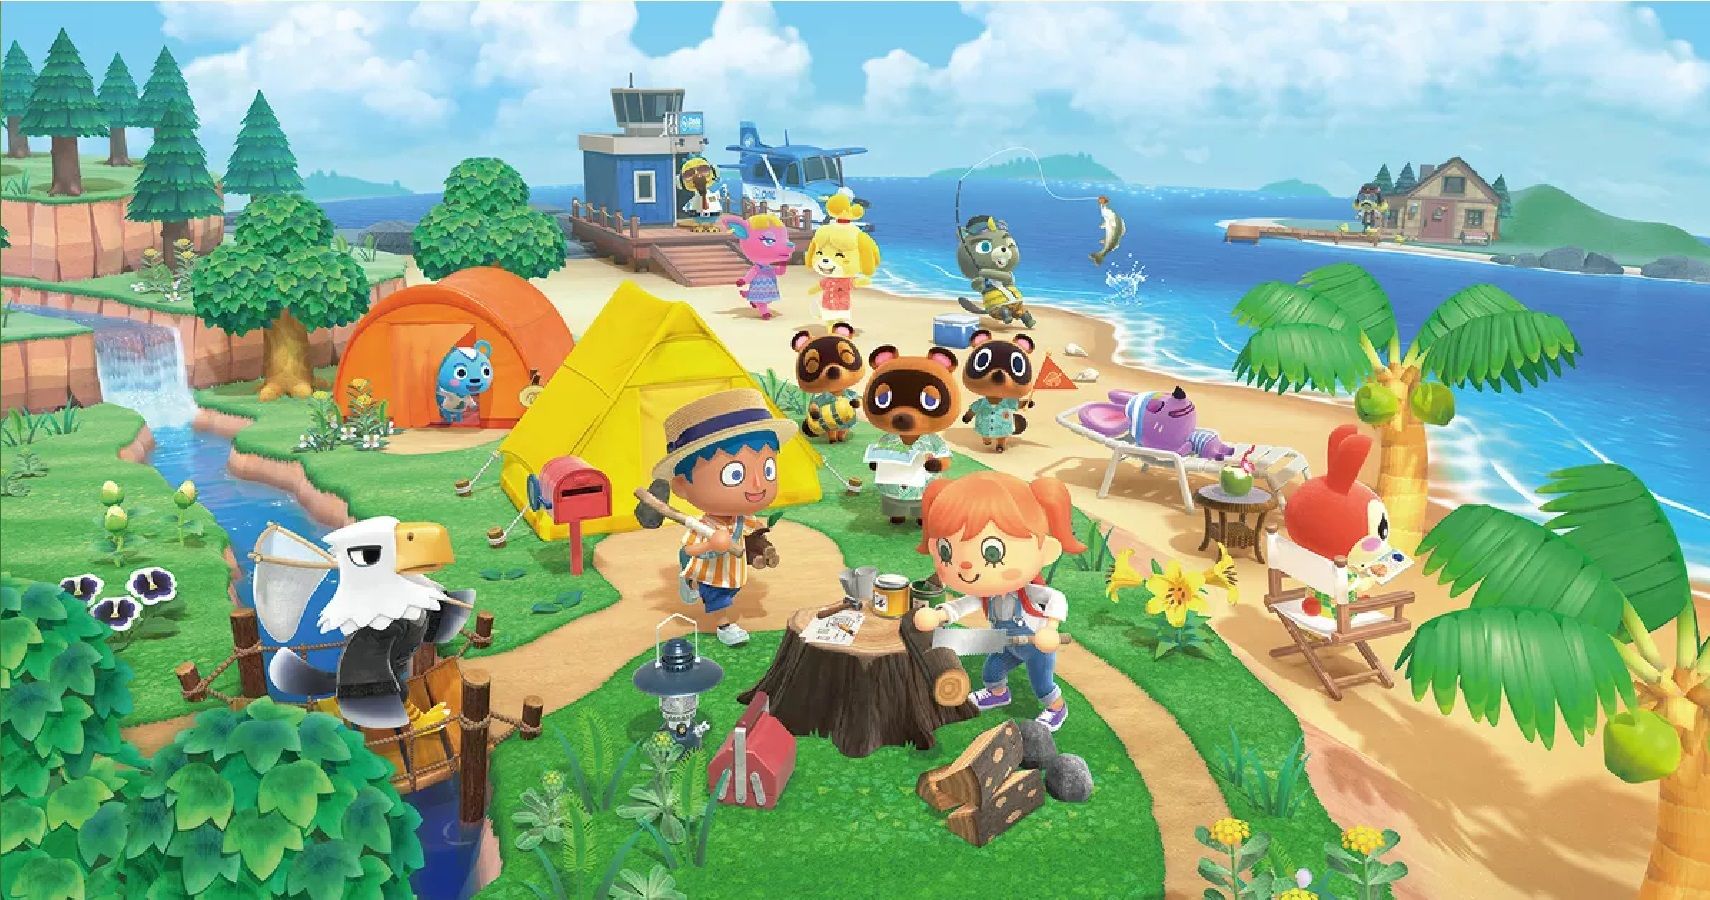 Download You Can Still Make A Fourth Level In Animal Crossing New Horizons